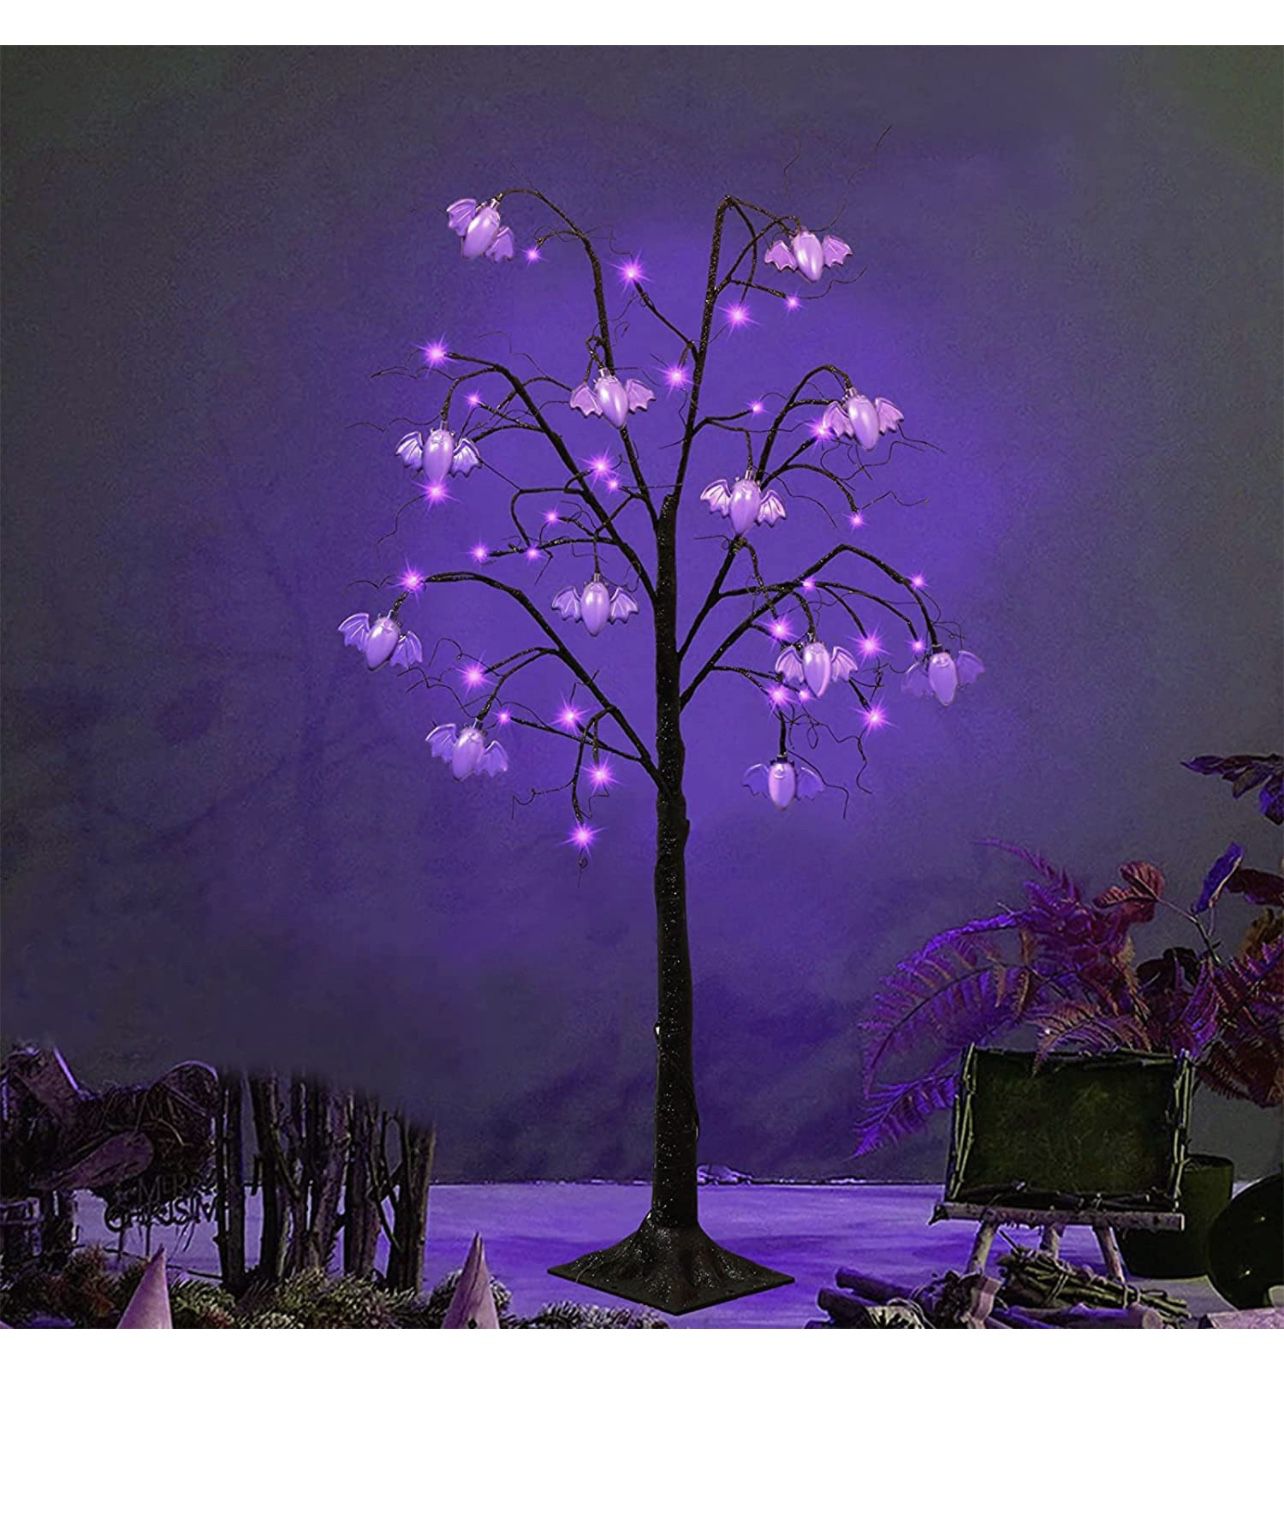 Twinkle Star Halloween Tree, 4FT Halloween Decoration Black Spooky Tree Glittered with 48 LED Purple Lights and 12 Bats, 24V 3.6W Low Voltage Artifici